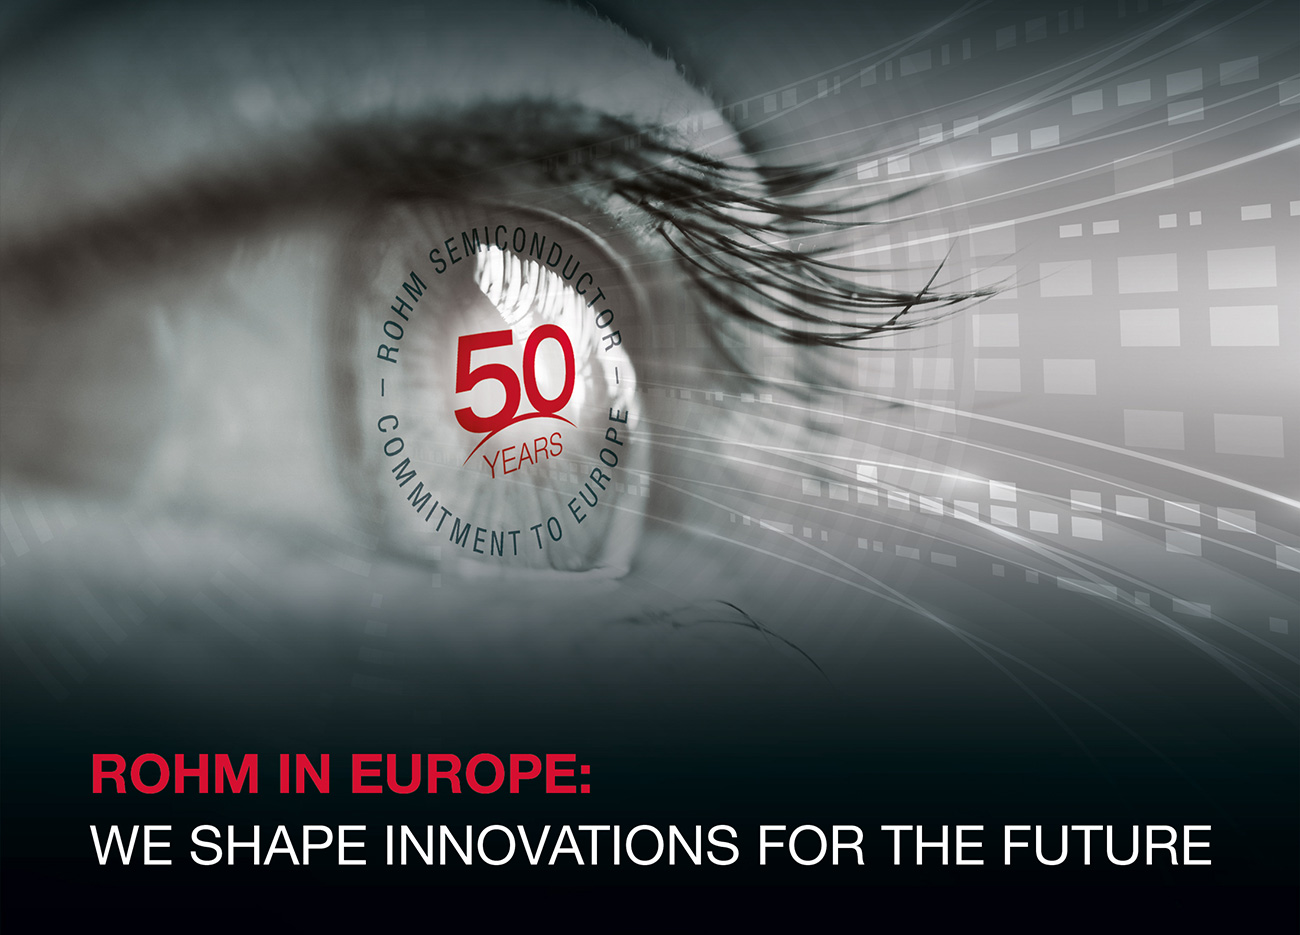 ROHM IN EUROPE:WE SHAPE INNOVATIONS FOR THE FUTURE